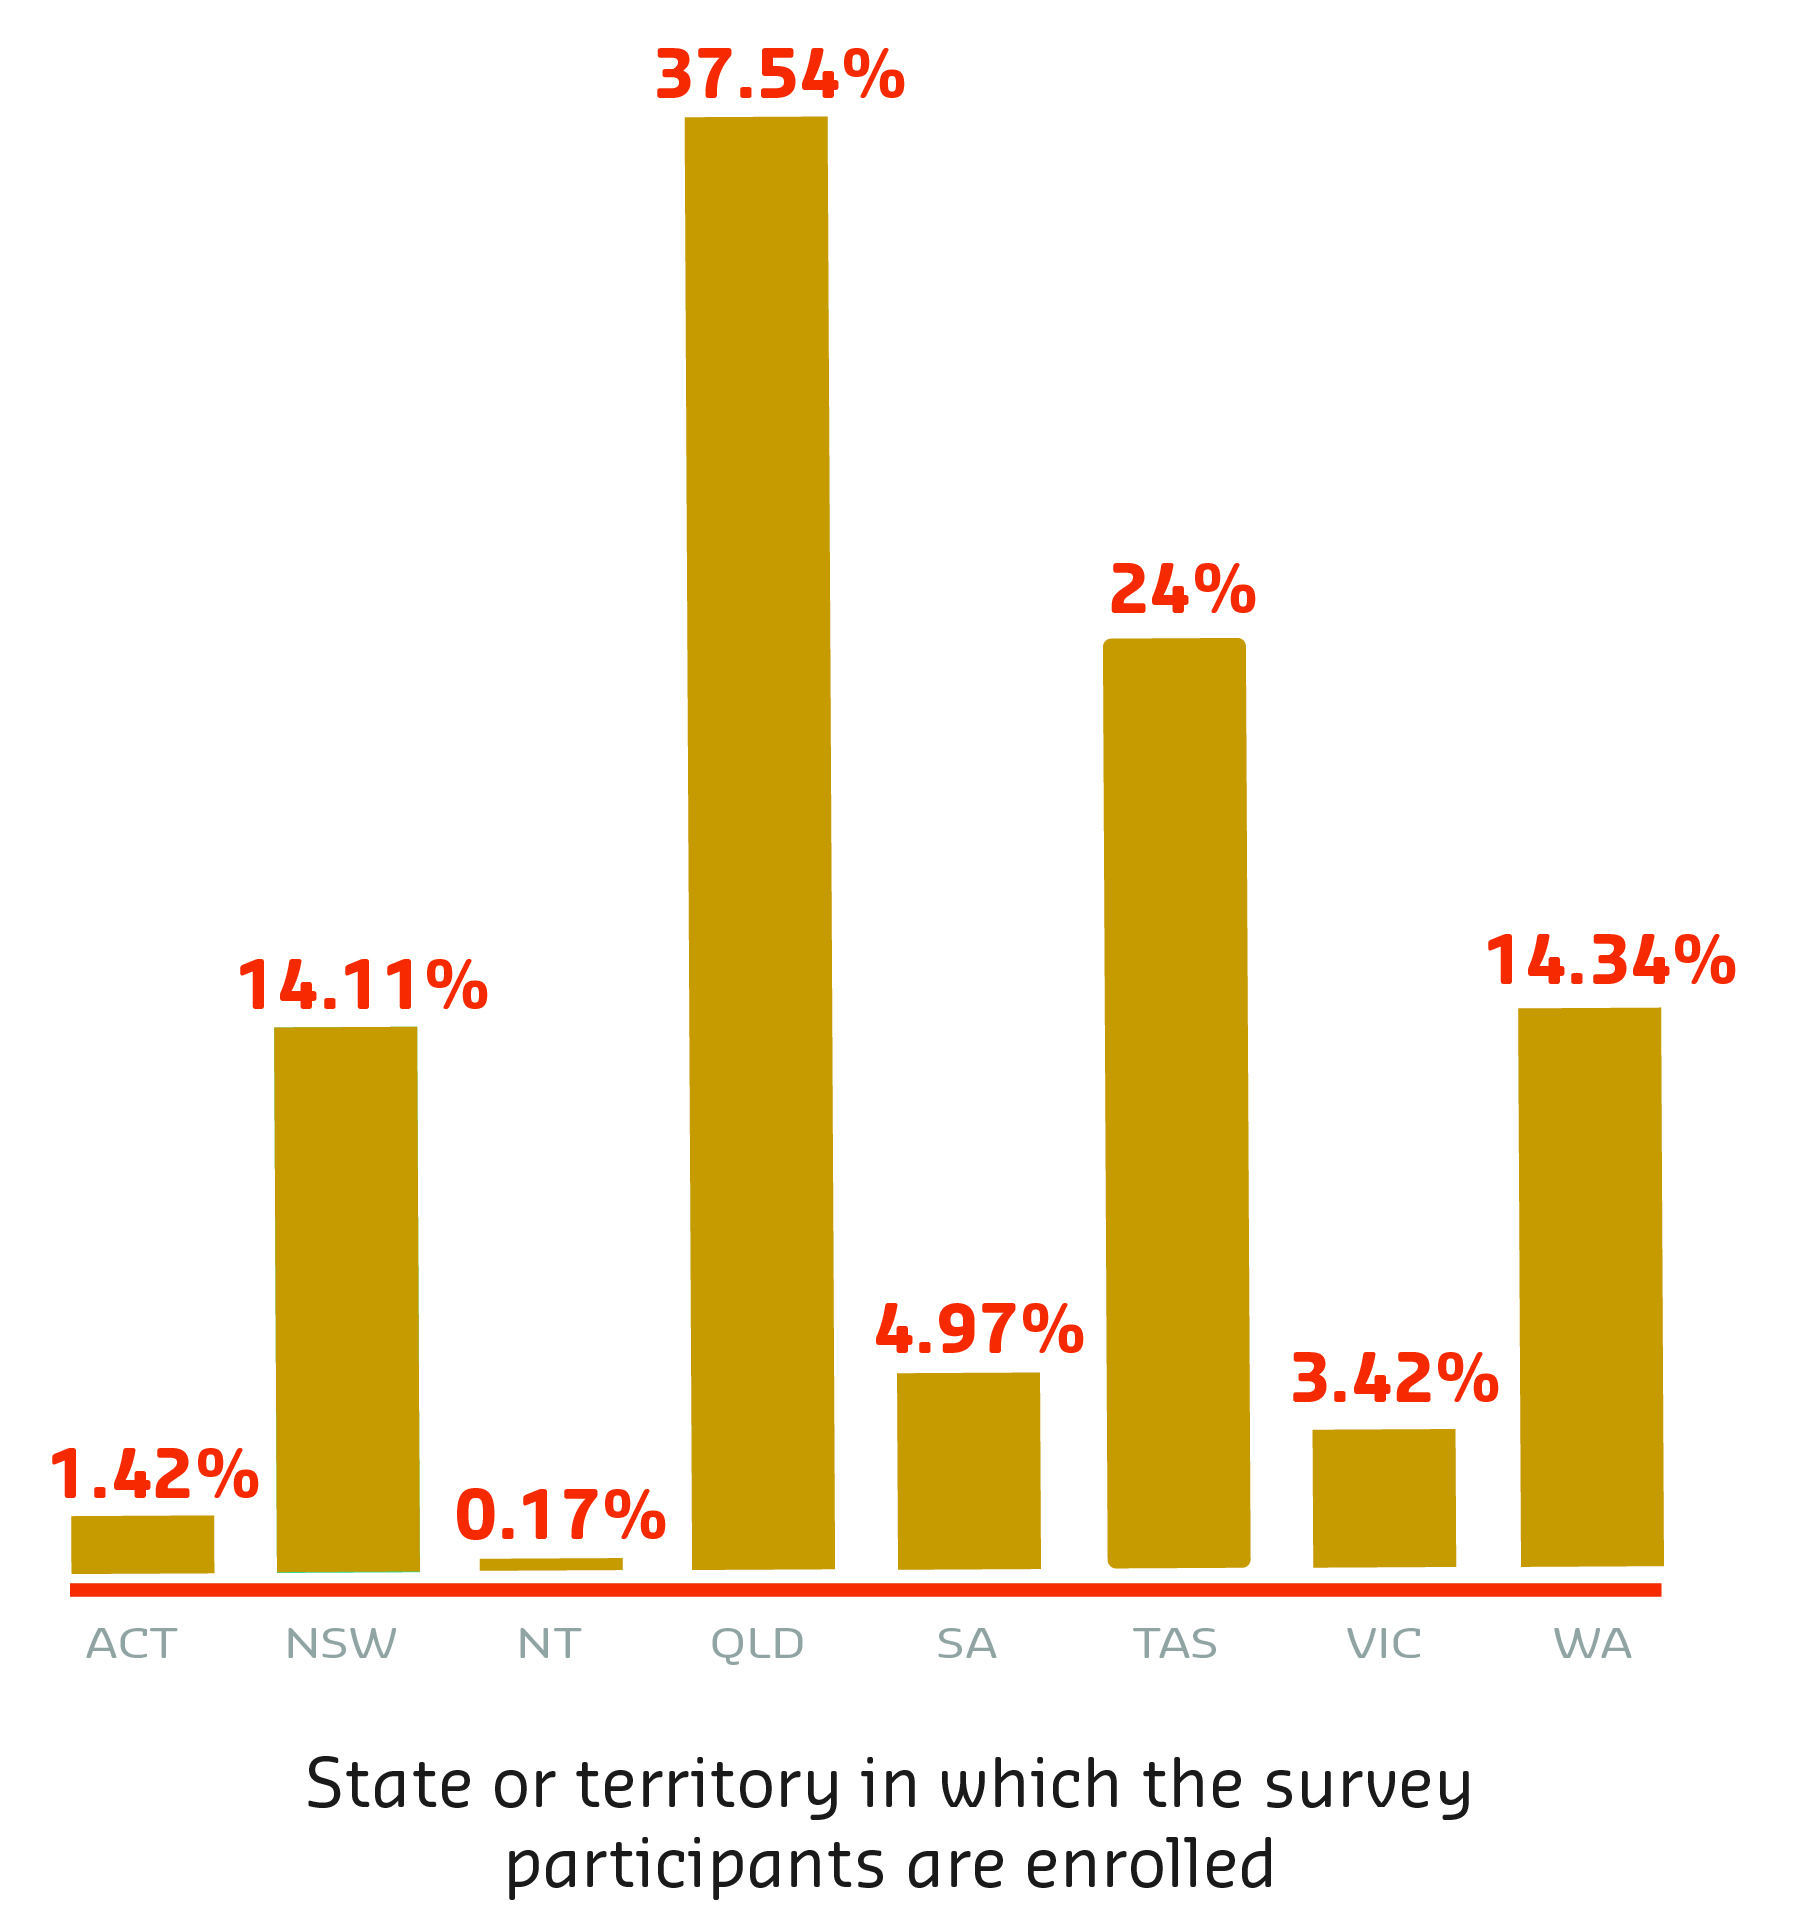 State or territory in which the survey participants are enrolled